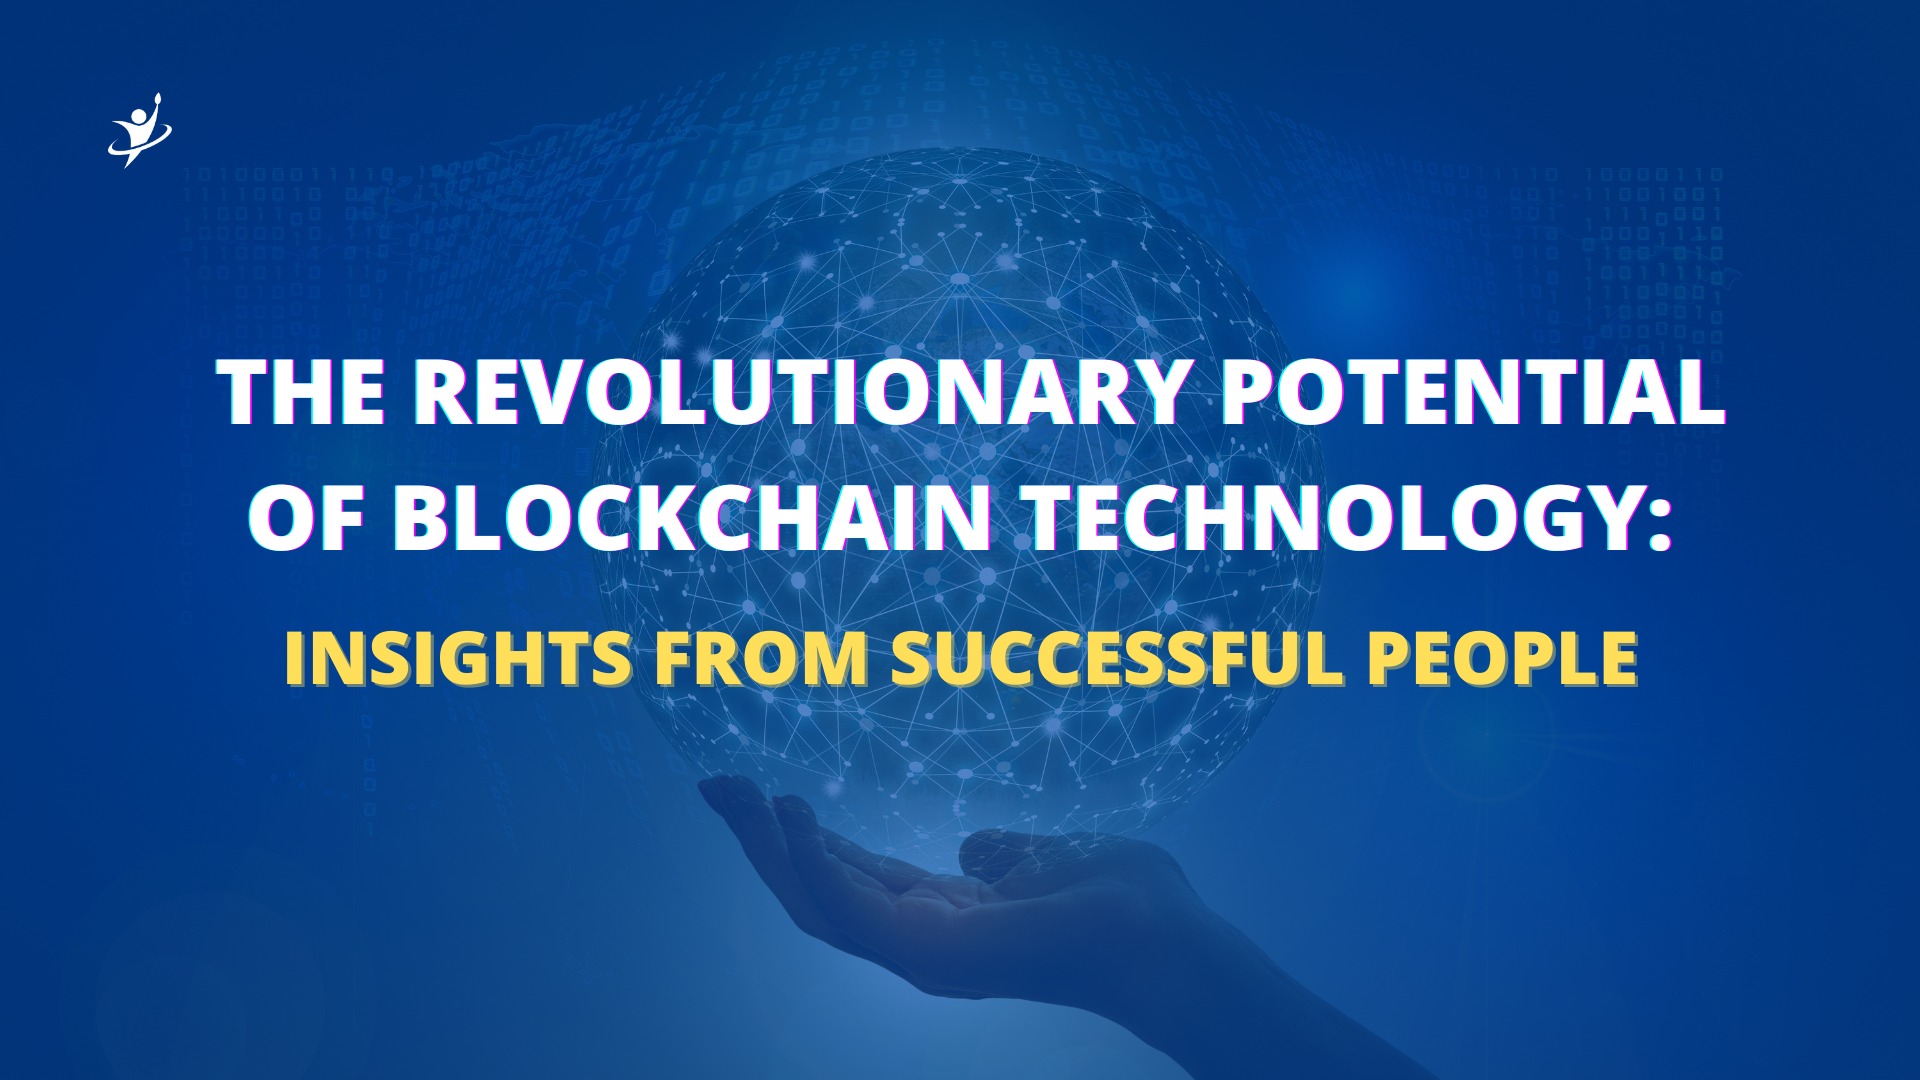 The Revolutionary Potential of Blockchain Technology: Insights from Successful People